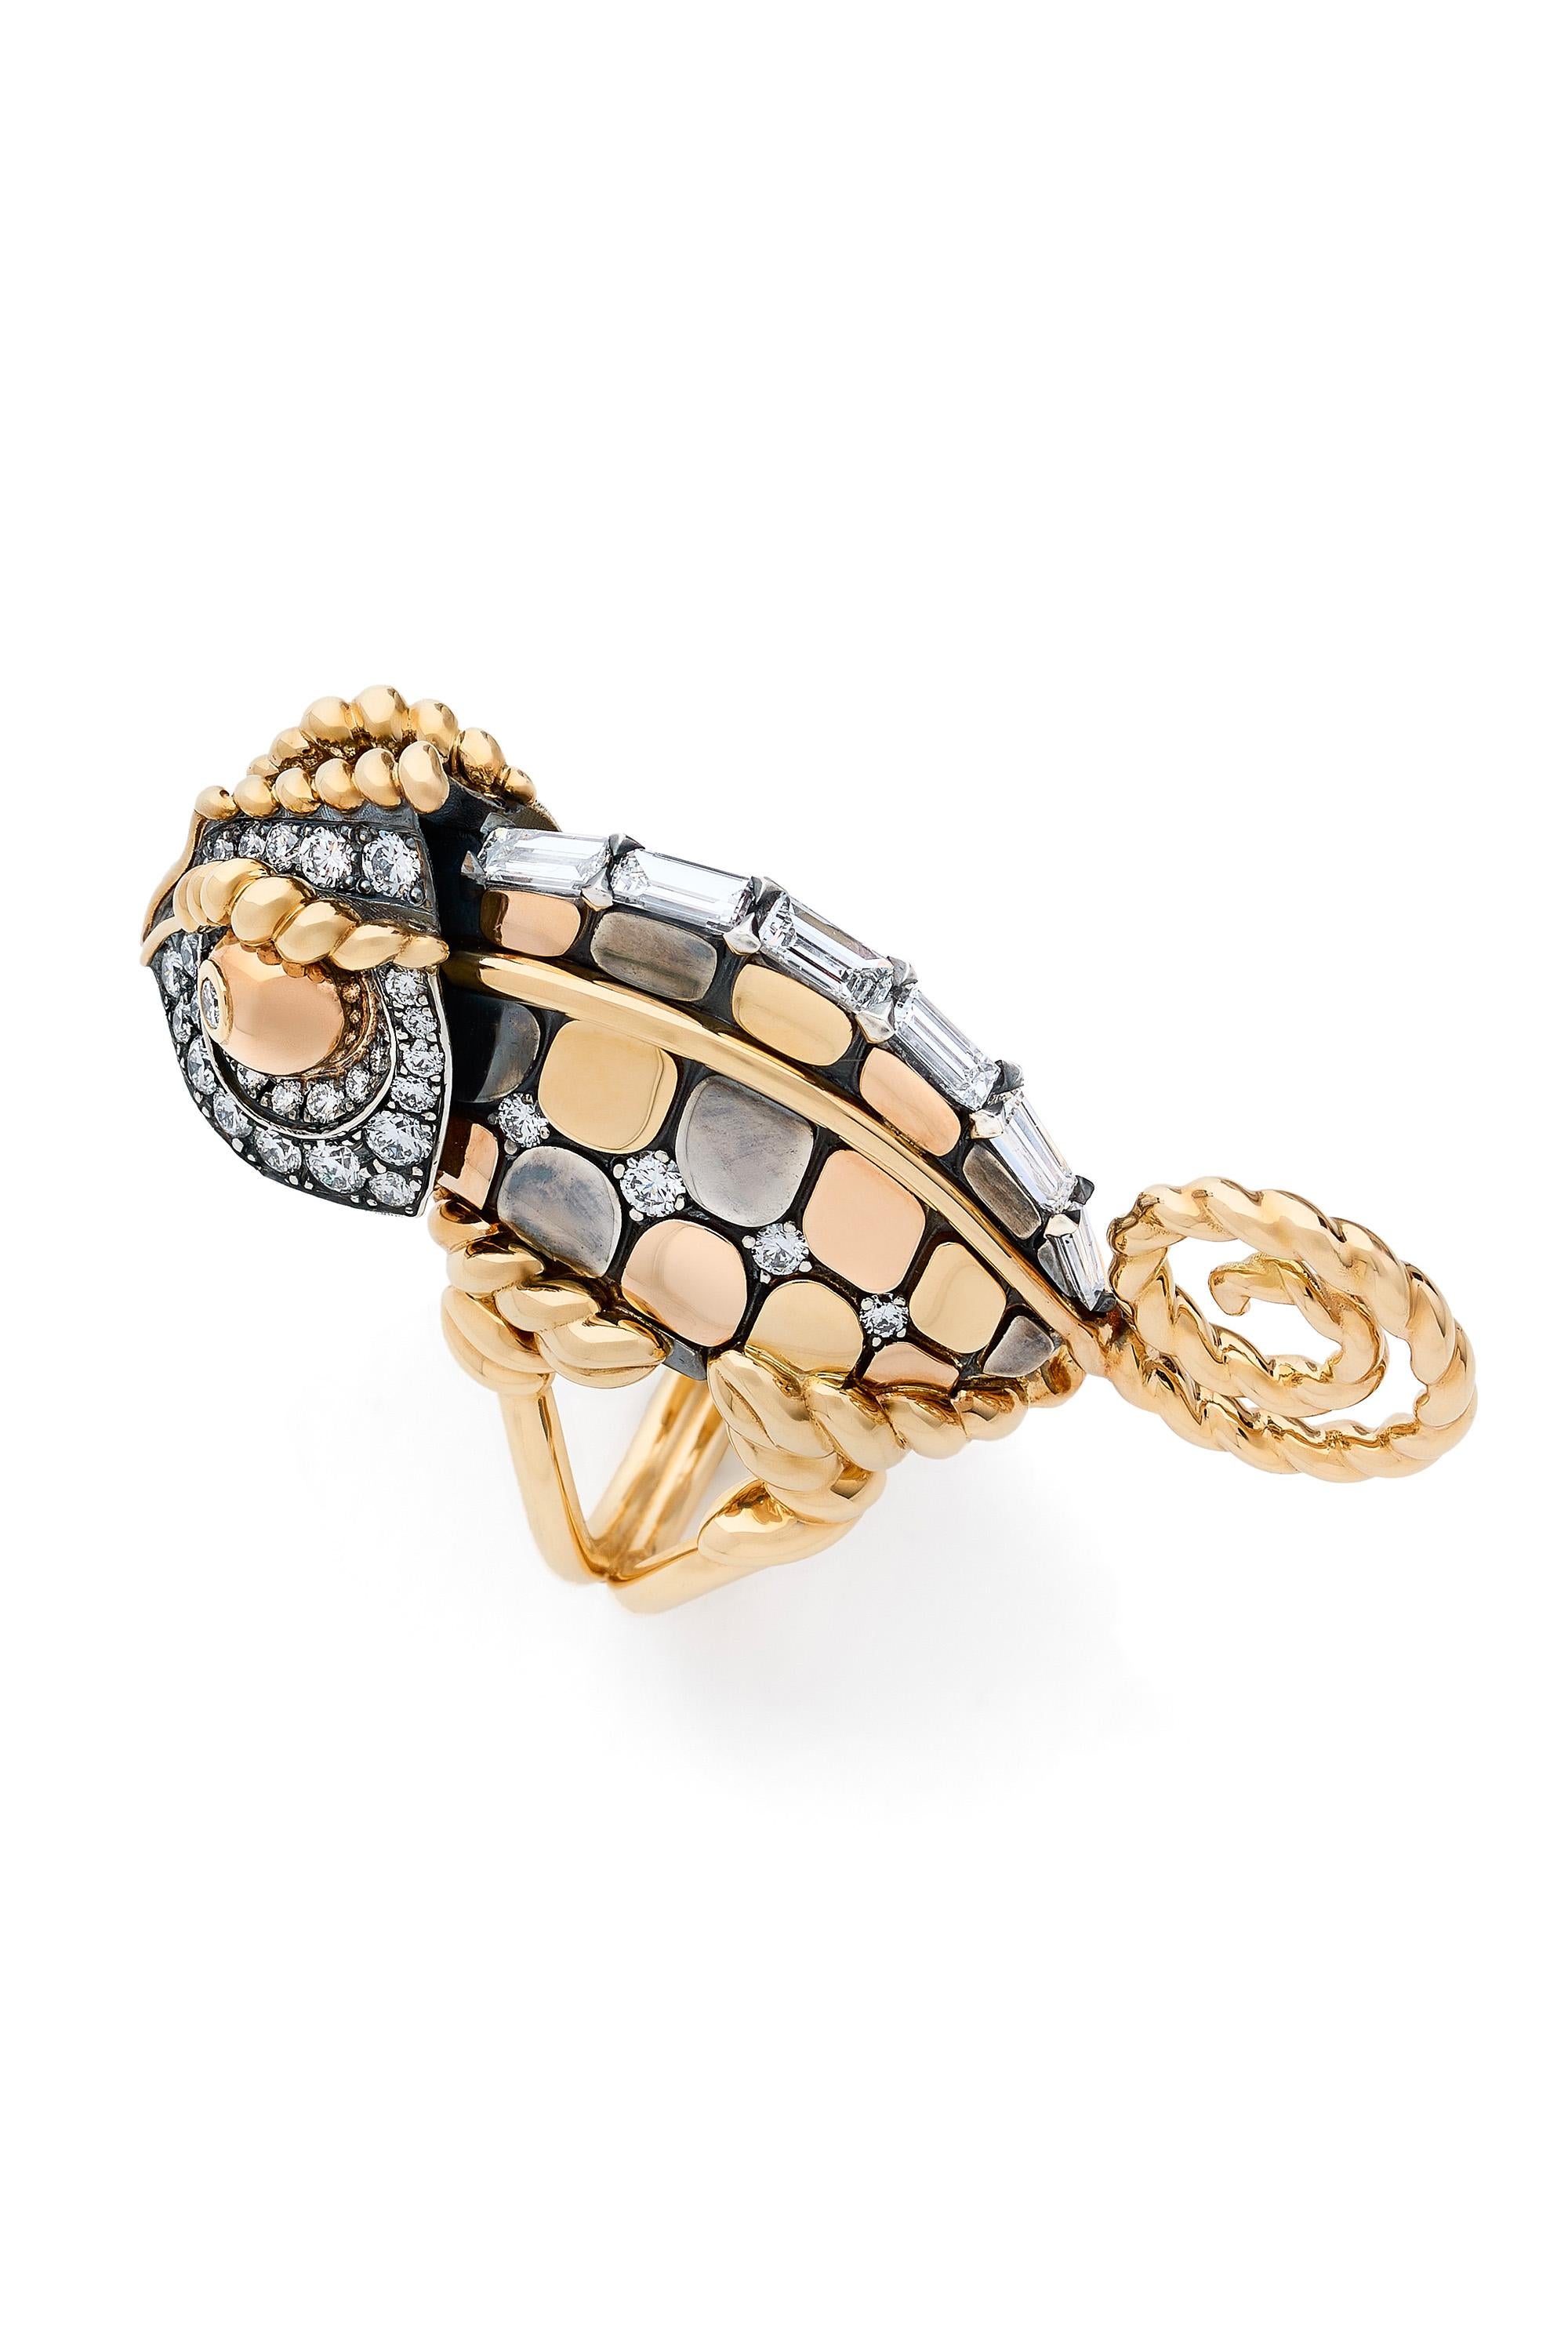 Neoclassical Diamond Caméléon Ring in 18k Yellow & Rose Gold by Elie Top For Sale